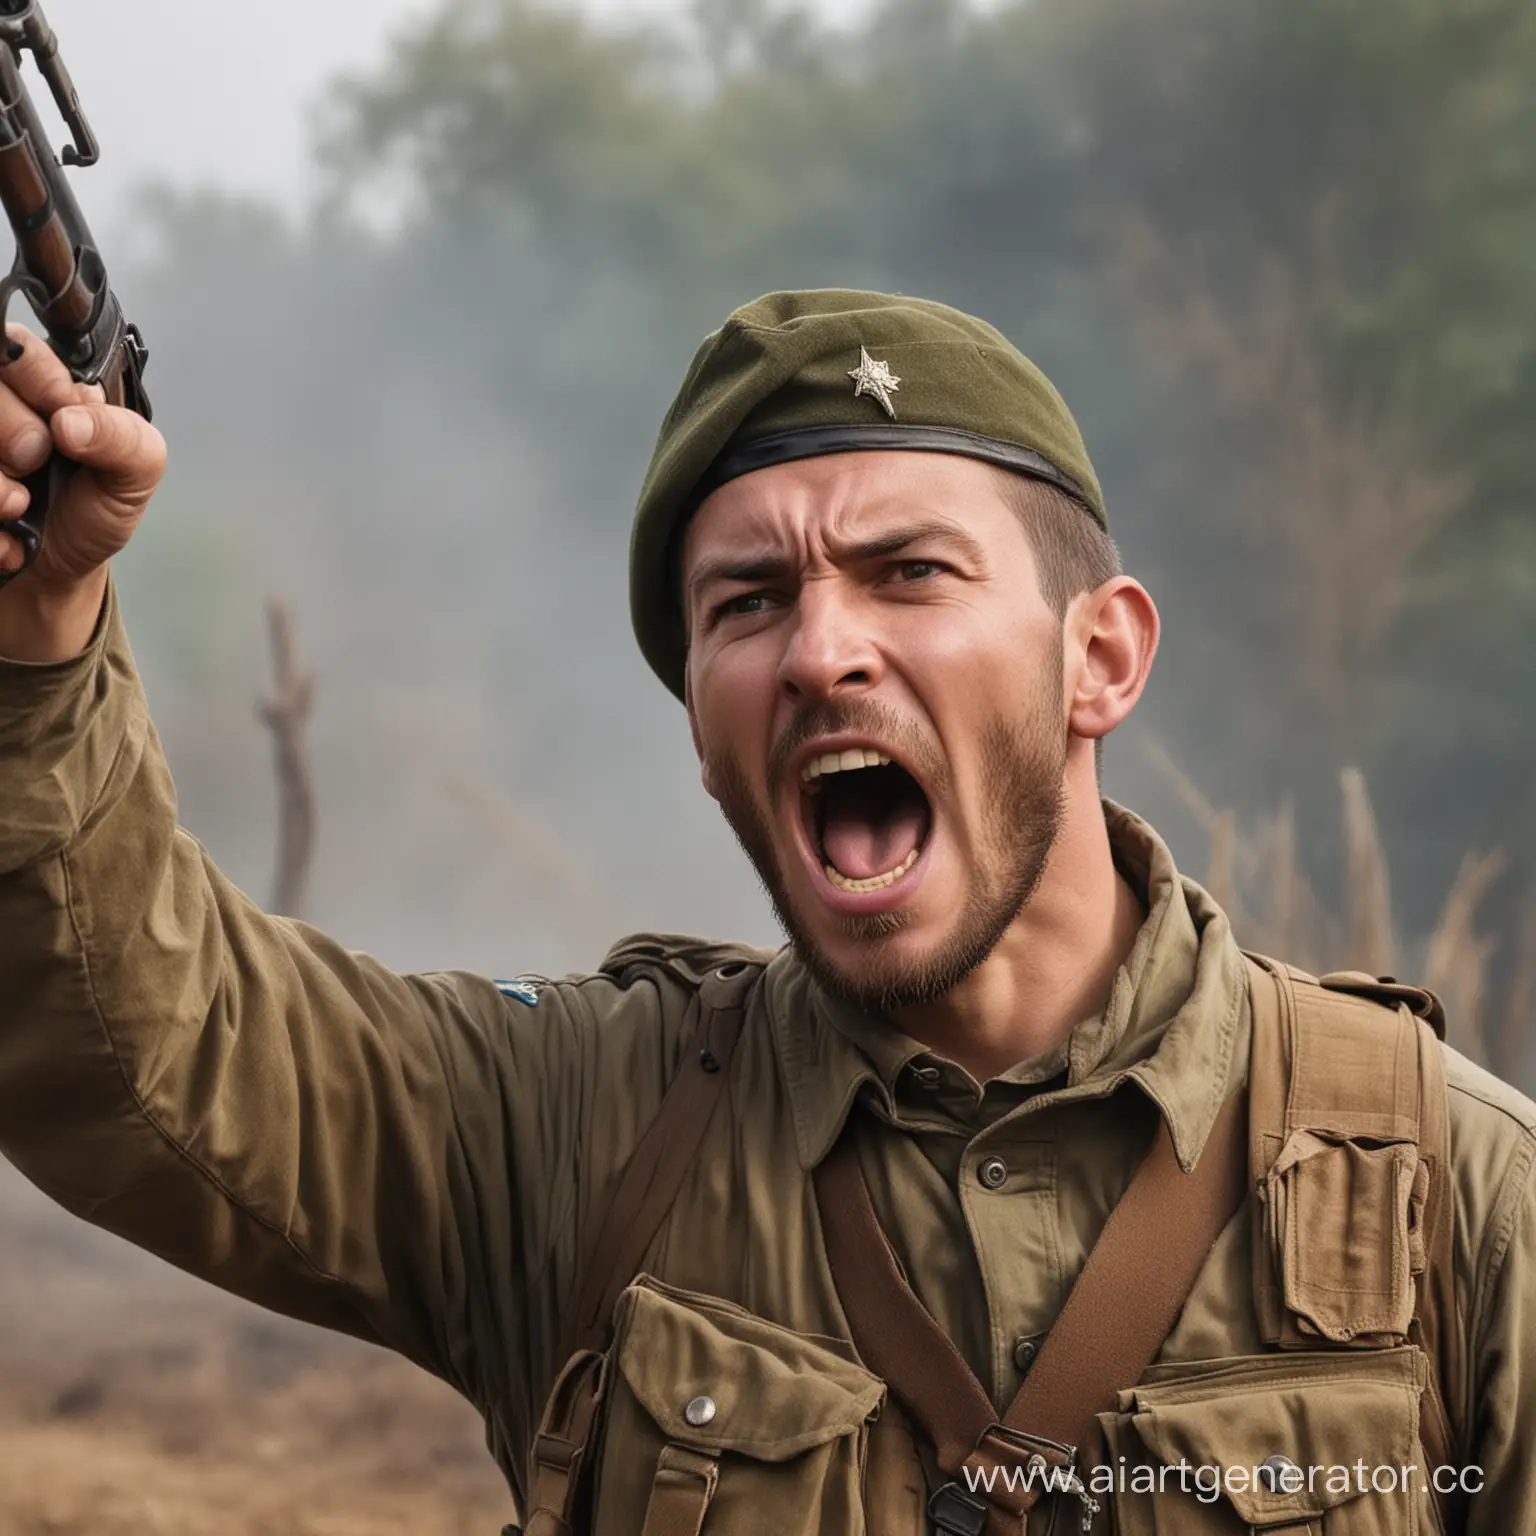 Soldier-Shouting-with-Raised-Rifle-in-Intense-Battle-Scene